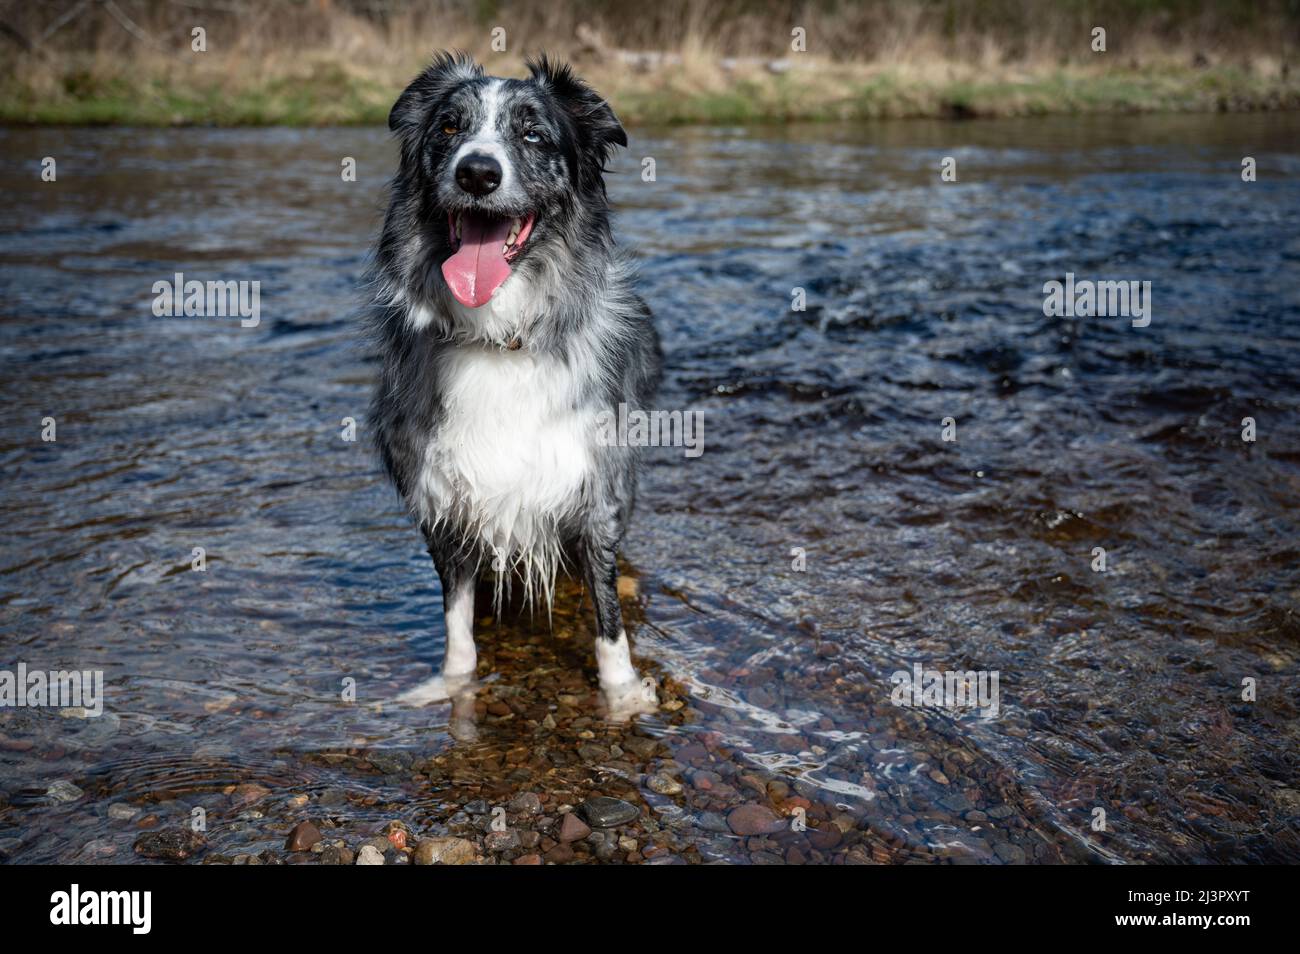 A blue merle border collie standing in the River Coiltie Stock Photo